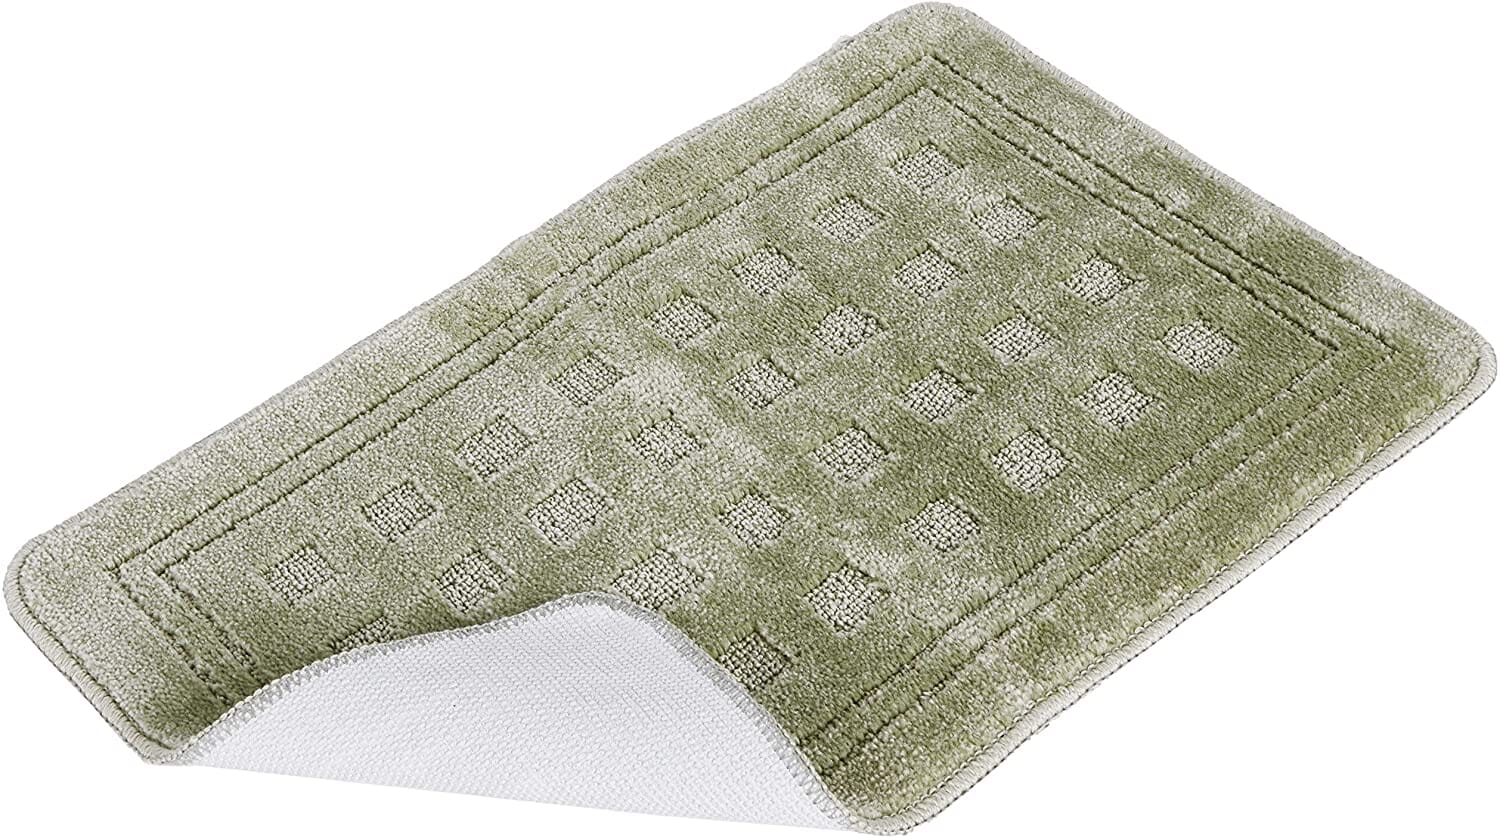 Town & Country Living Beige Padded Bath Mat 2 Pack